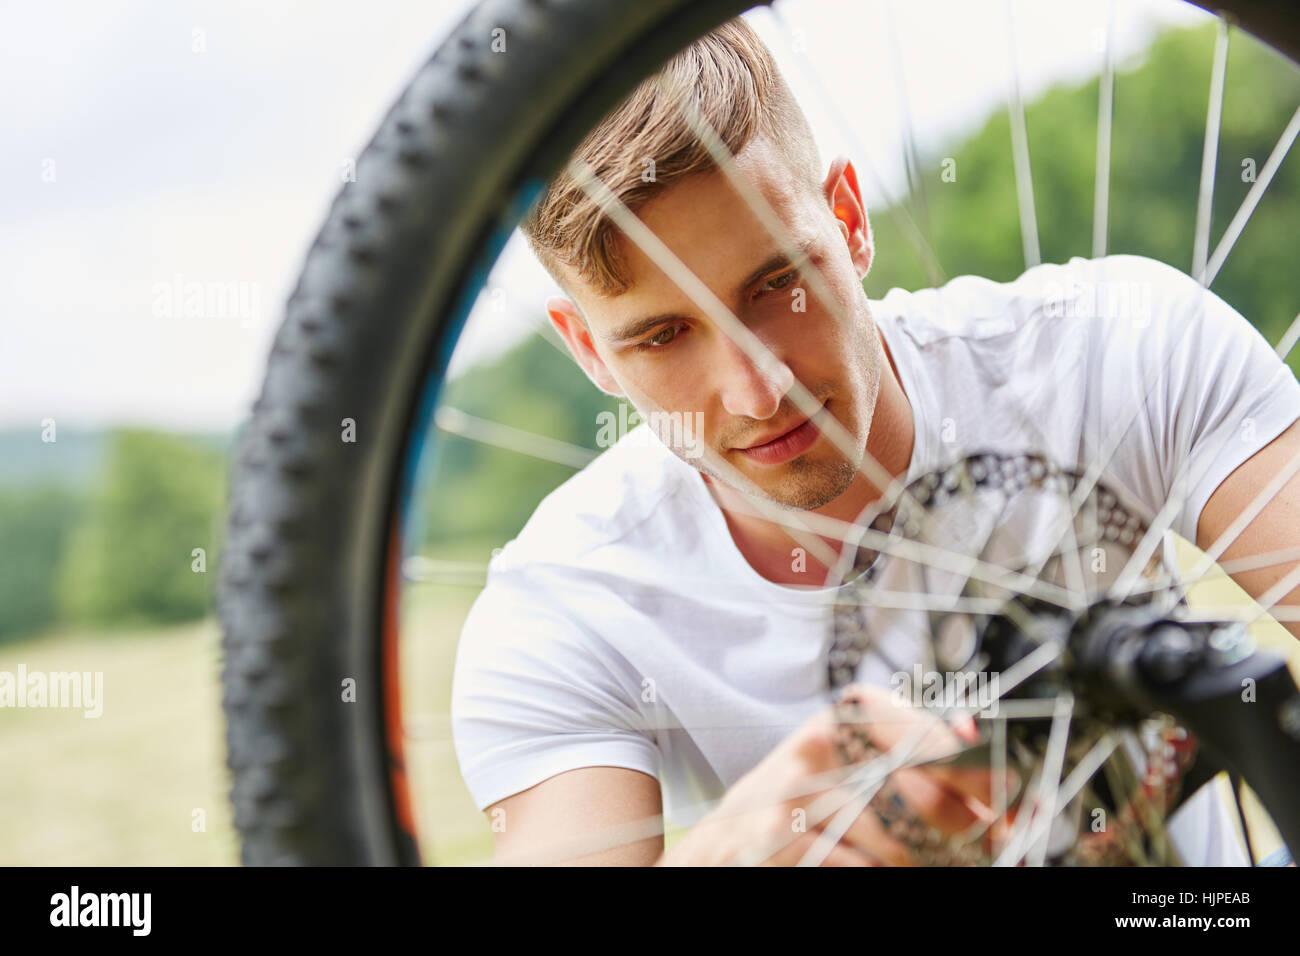 Young man repairs bike after breakdown Stock Photo